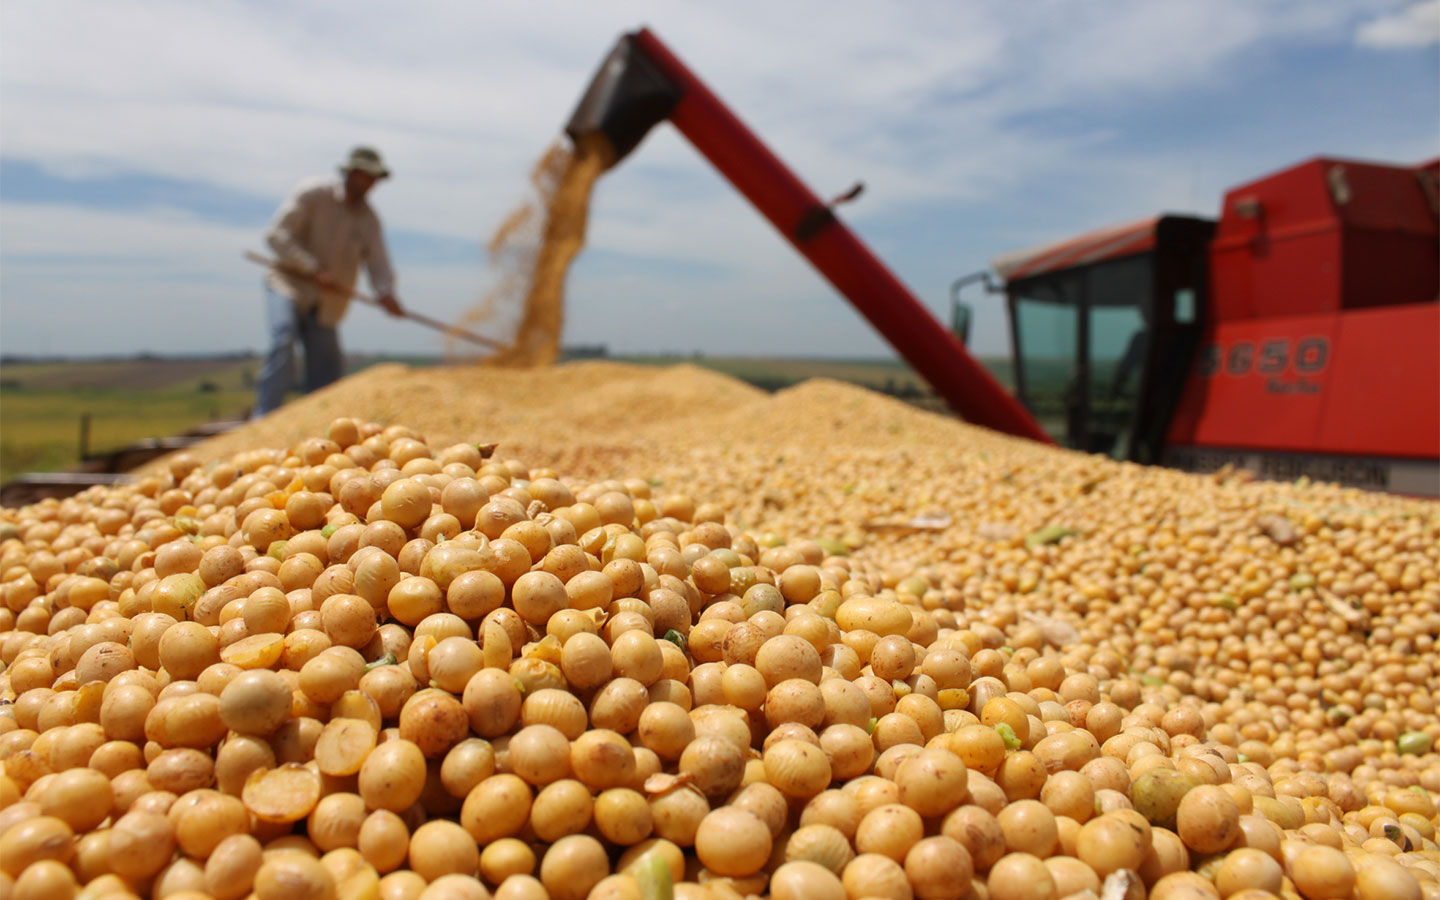 China’s imports of Brazilian soybeans have surged in the first six months of the year